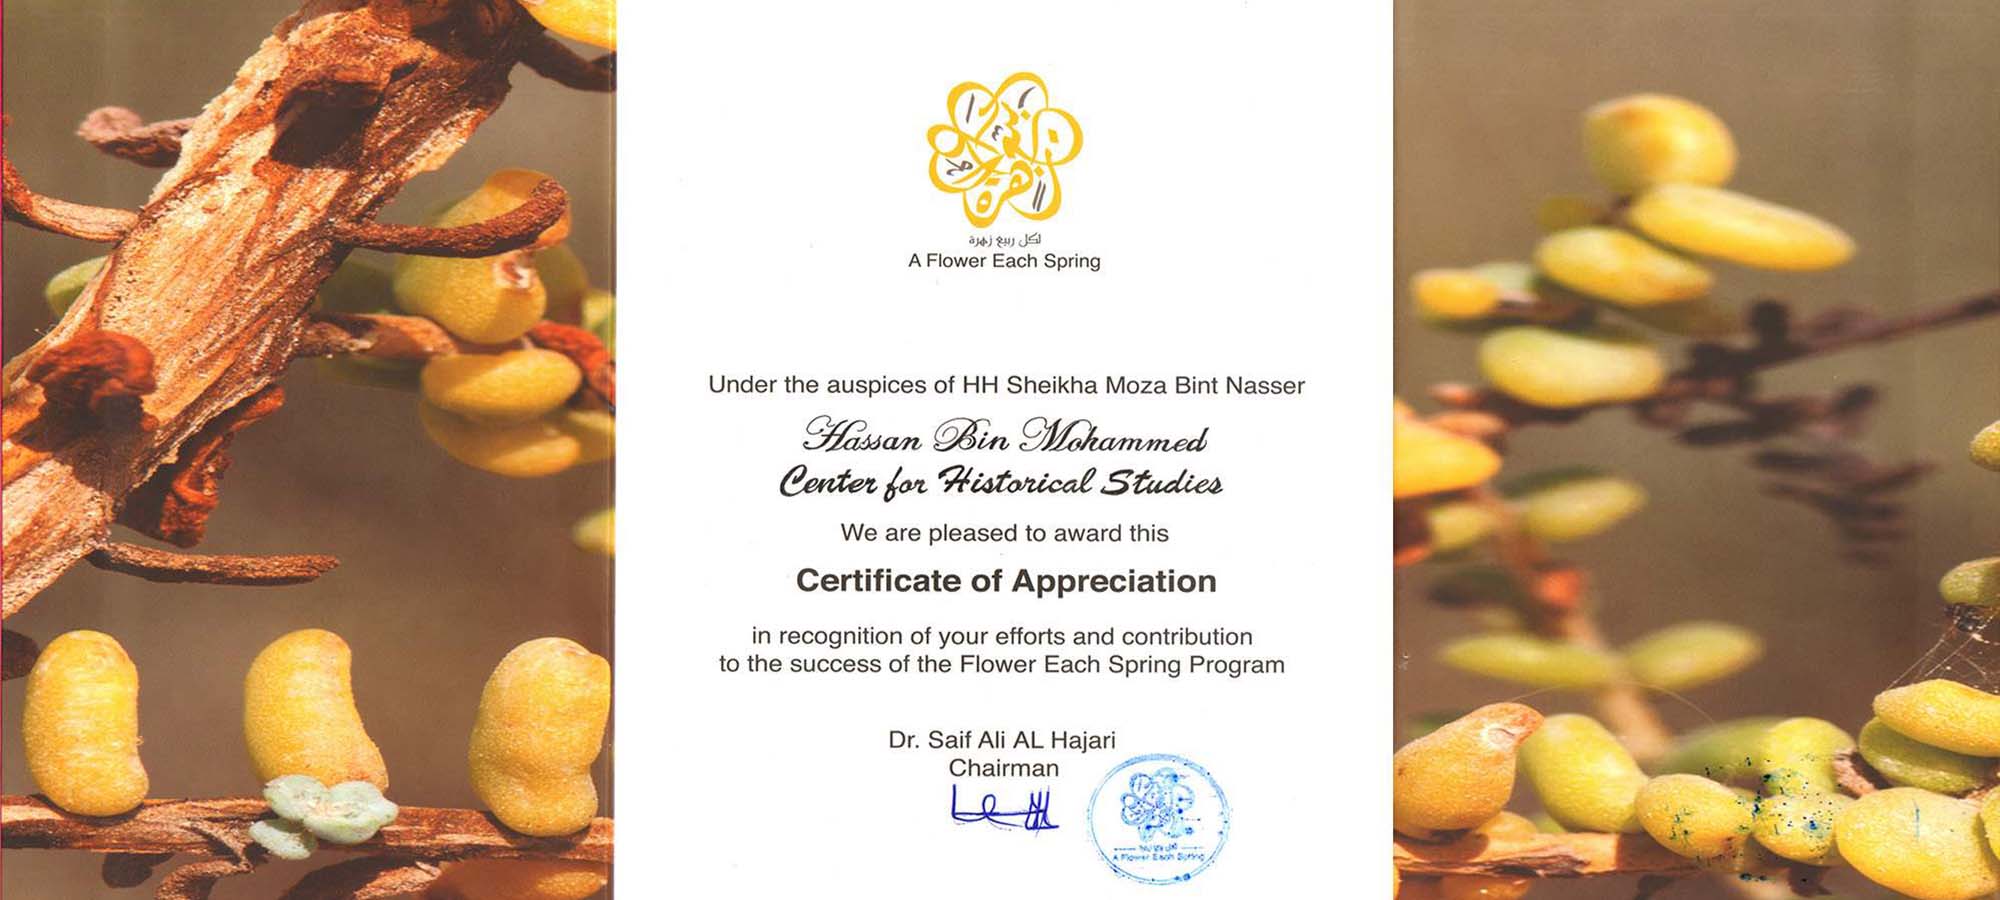 The Center Participates in the Activities of “A Flower Each Spring” Program (Jan. 2018)